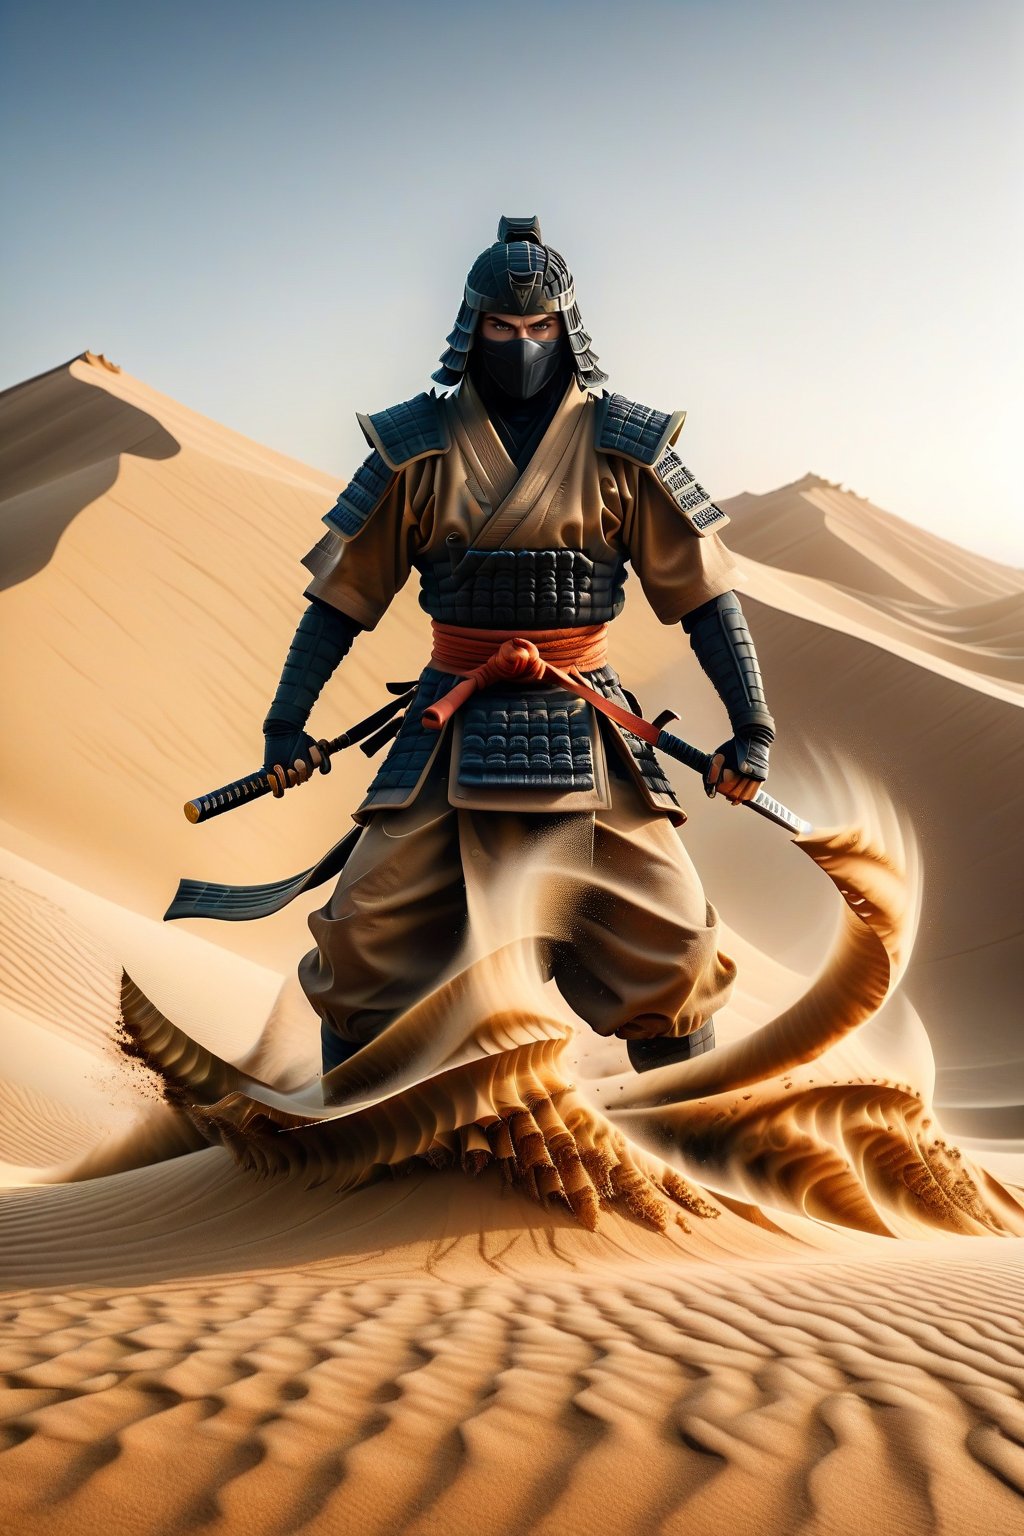 A ninja in realistic style performing Earth-style ninjutsu in the desert, summoning a grand and massive samurai made of sand and earth. The samurai stands towering and formidable, with detailed armor and a sword, showcasing the power and precision of the ninja's technique. The scene is set against a vast desert backdrop, with towering dunes and a clear sky, highlighting the epic scale of the summoned sand samurai. The image captures the essence of ancient warrior spirit blended with the realism of martial prowess.